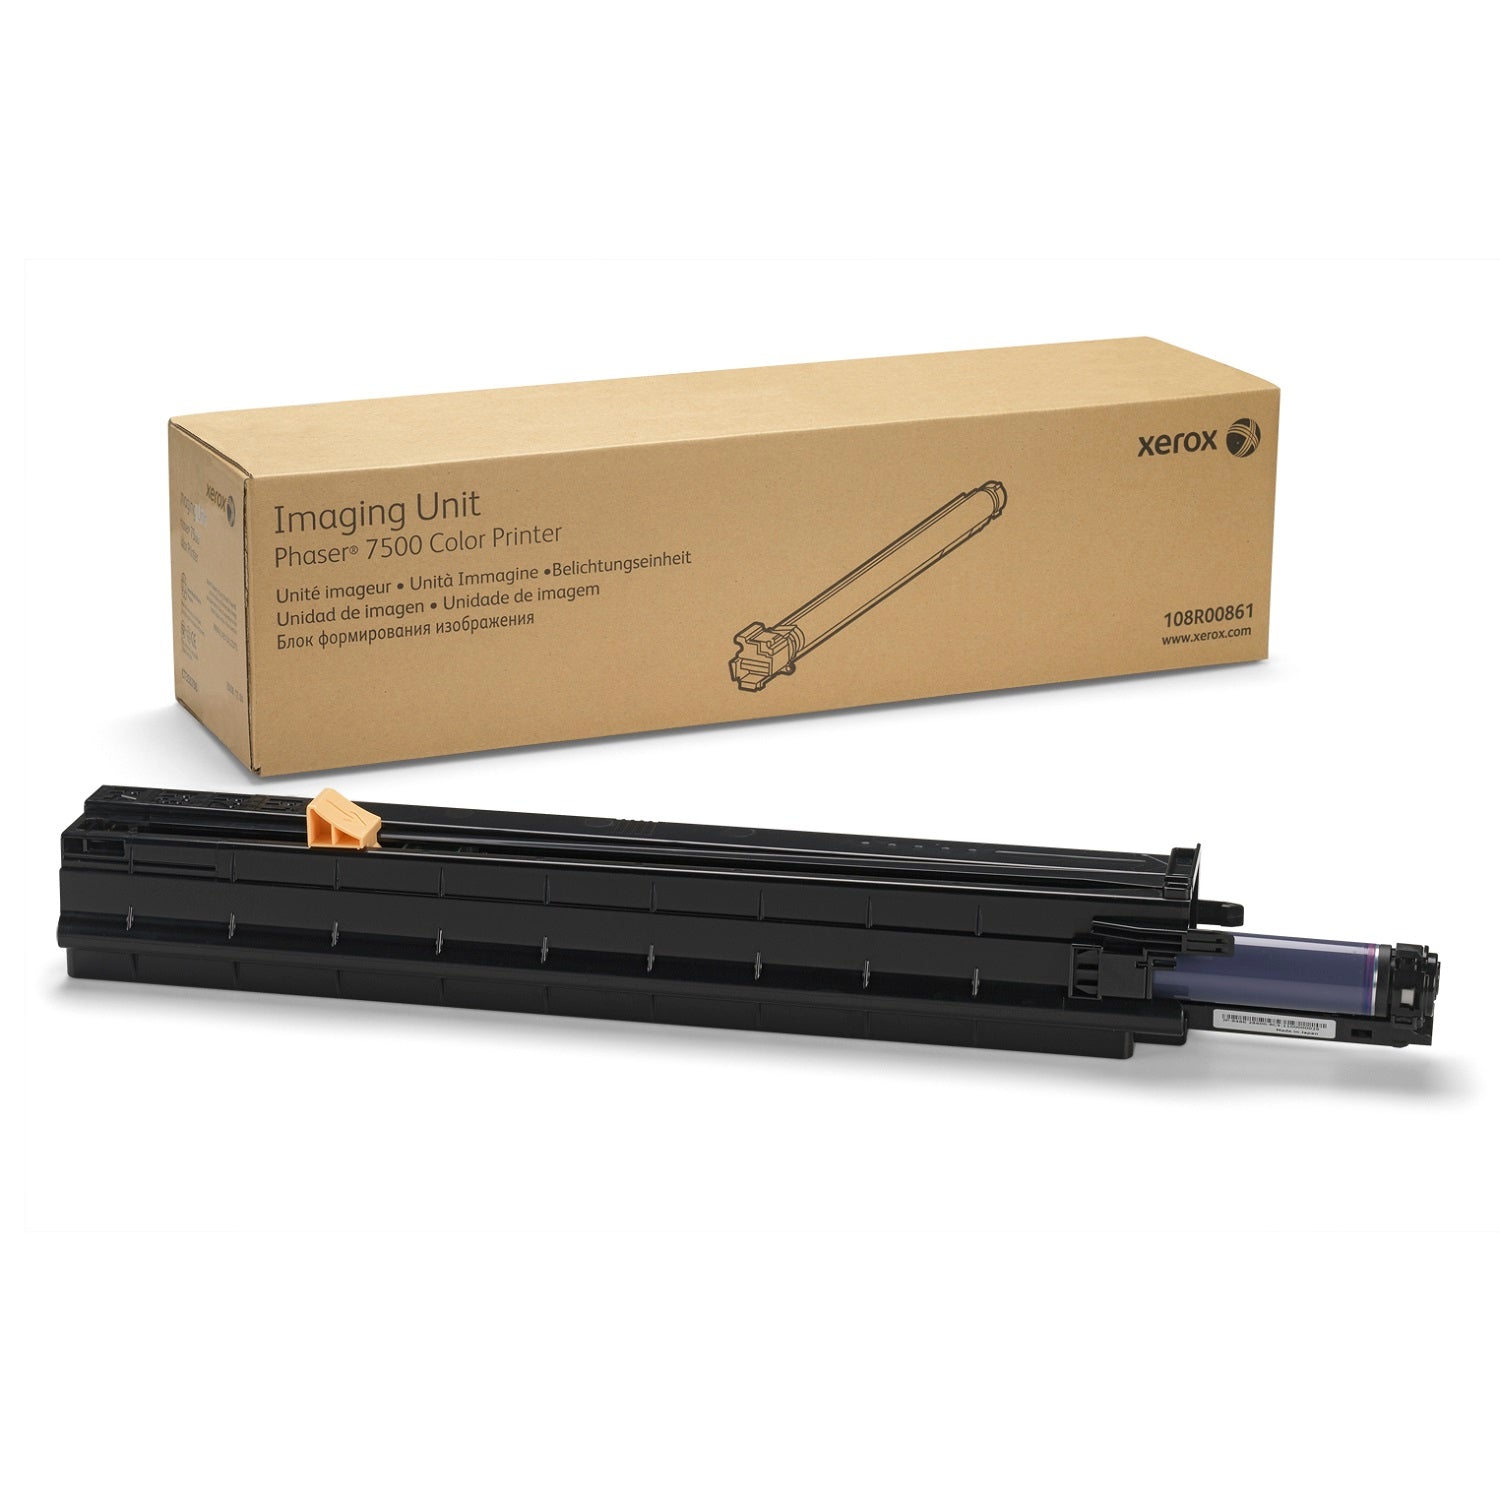 Absolute Toner Xerox 108R00861 Genuine Imaging Unit For Use With The Phaser 7500 Original Xerox Cartridges